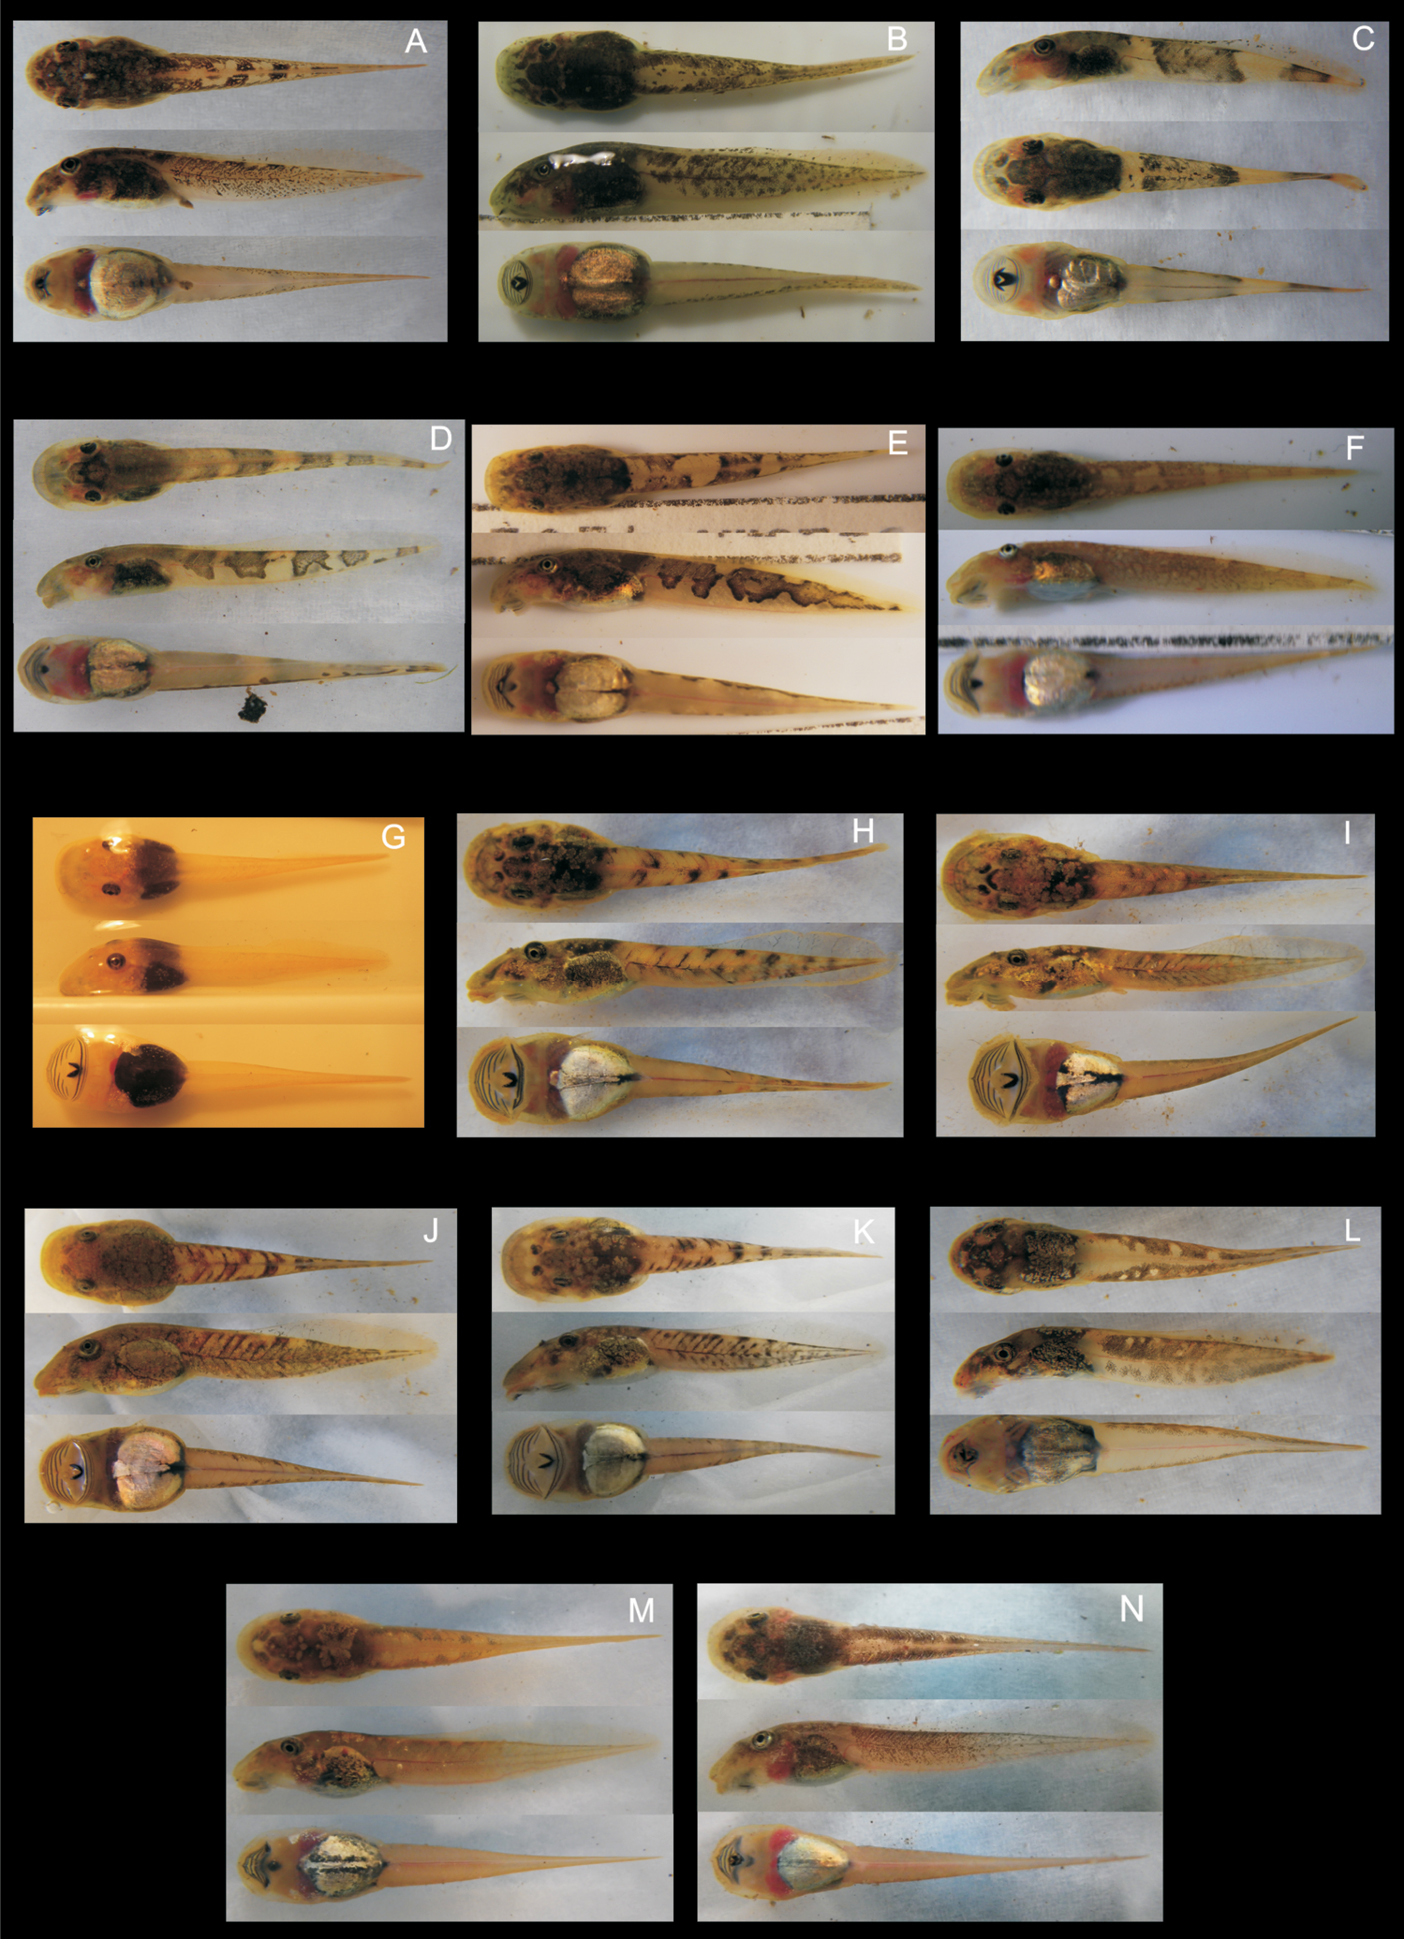 Diversity of the strongly rheophilous tadpoles of Malagasy tree